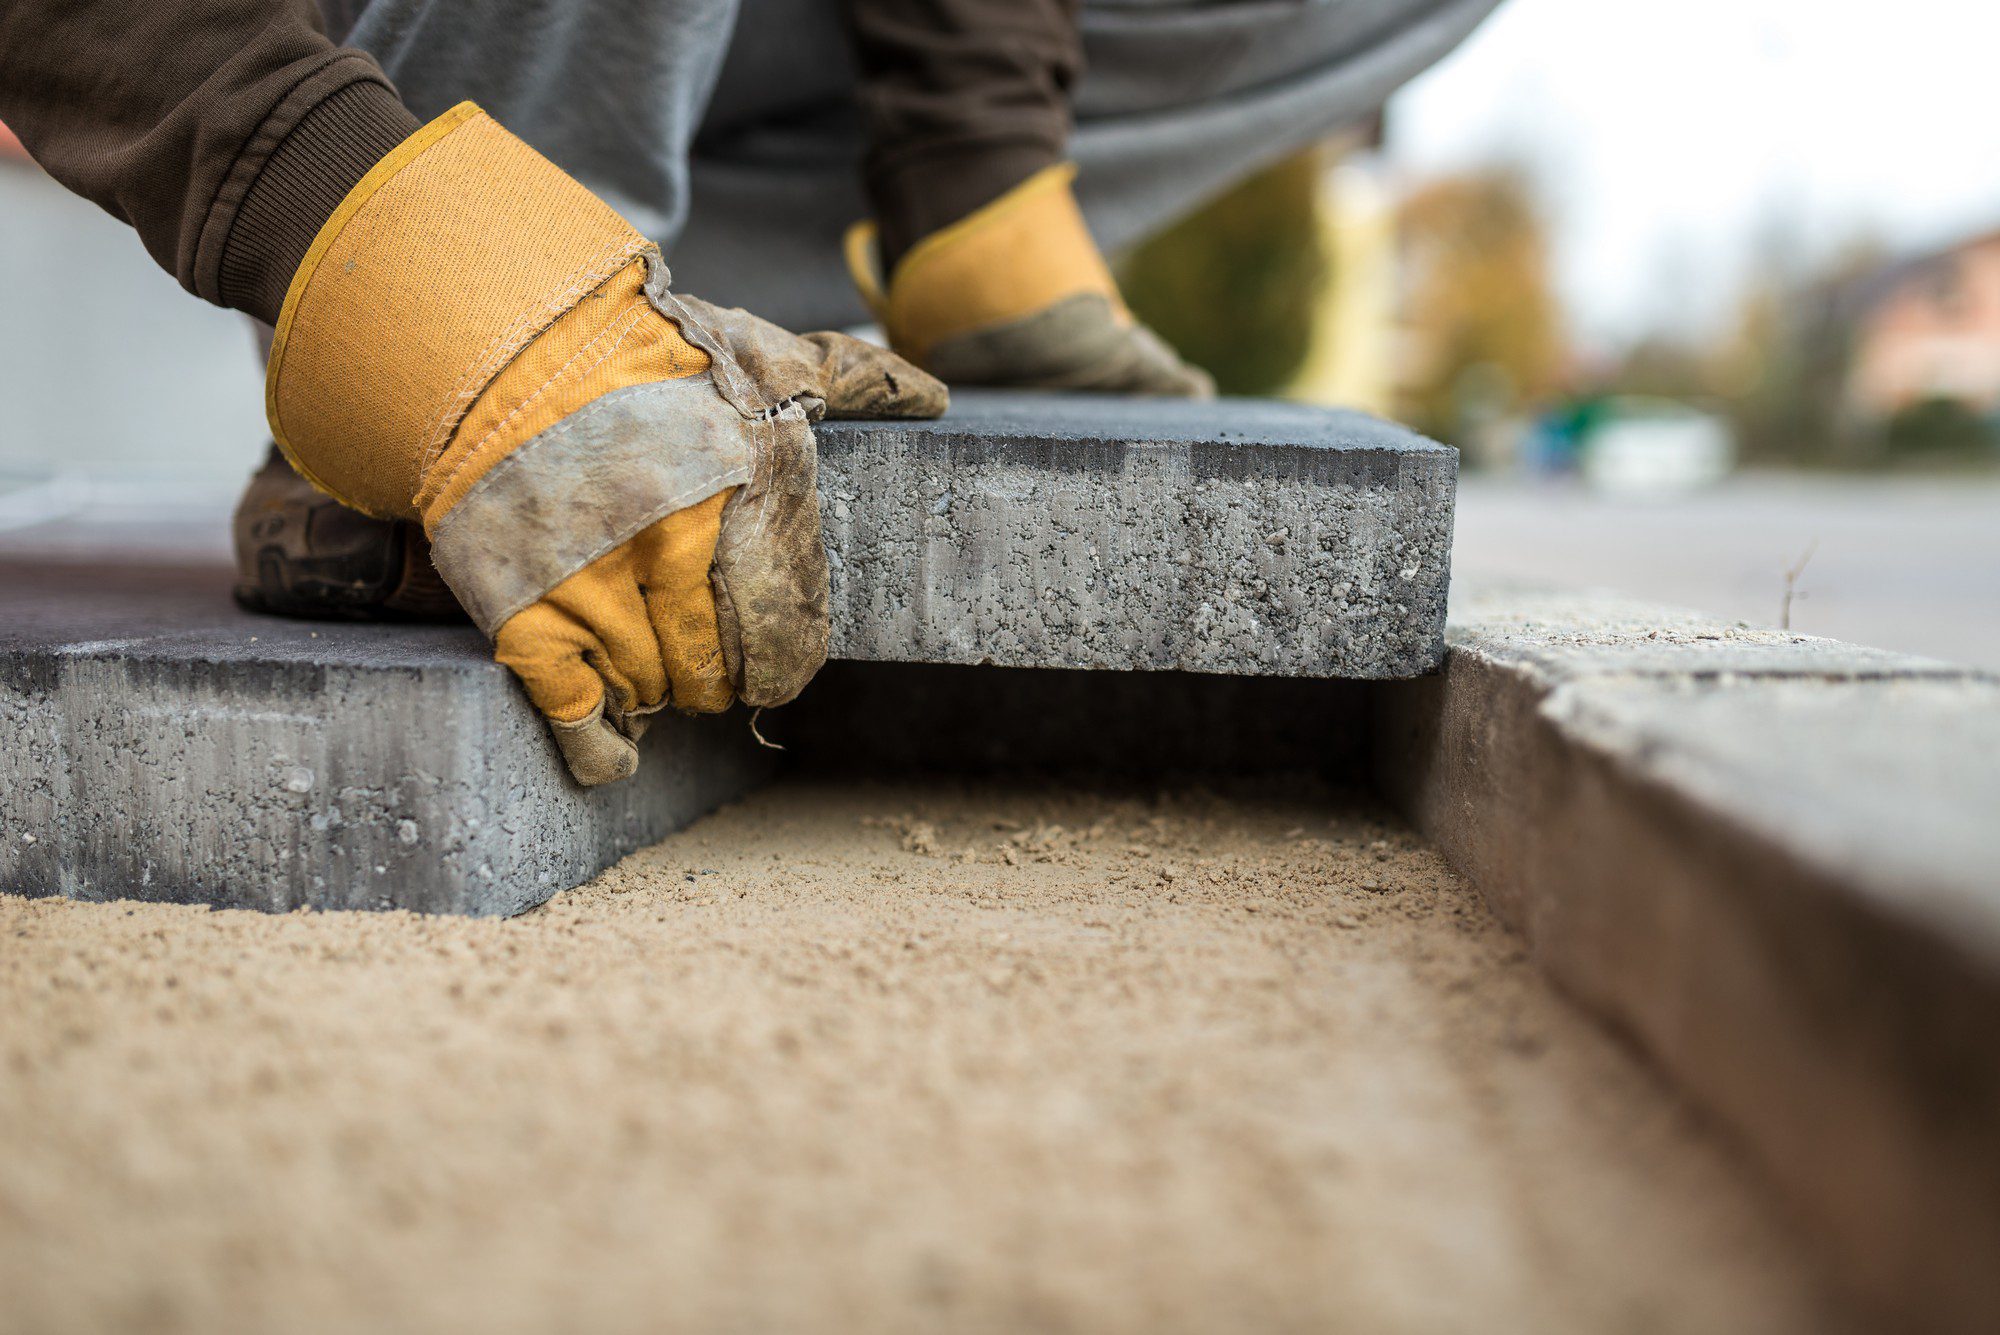 The image depicts a close-up view of a person's hands wearing yellow work gloves. The individual appears to be engaged in construction work, precisely laying or adjusting a concrete block or paving stone on a sand base. The focus on the hands indicates that the person is performing a task that requires manual skill and possibly precision. The background is blurred, but it seems to be an outdoor setting, perhaps a construction site, driveway or walkway where paving installation is taking place.